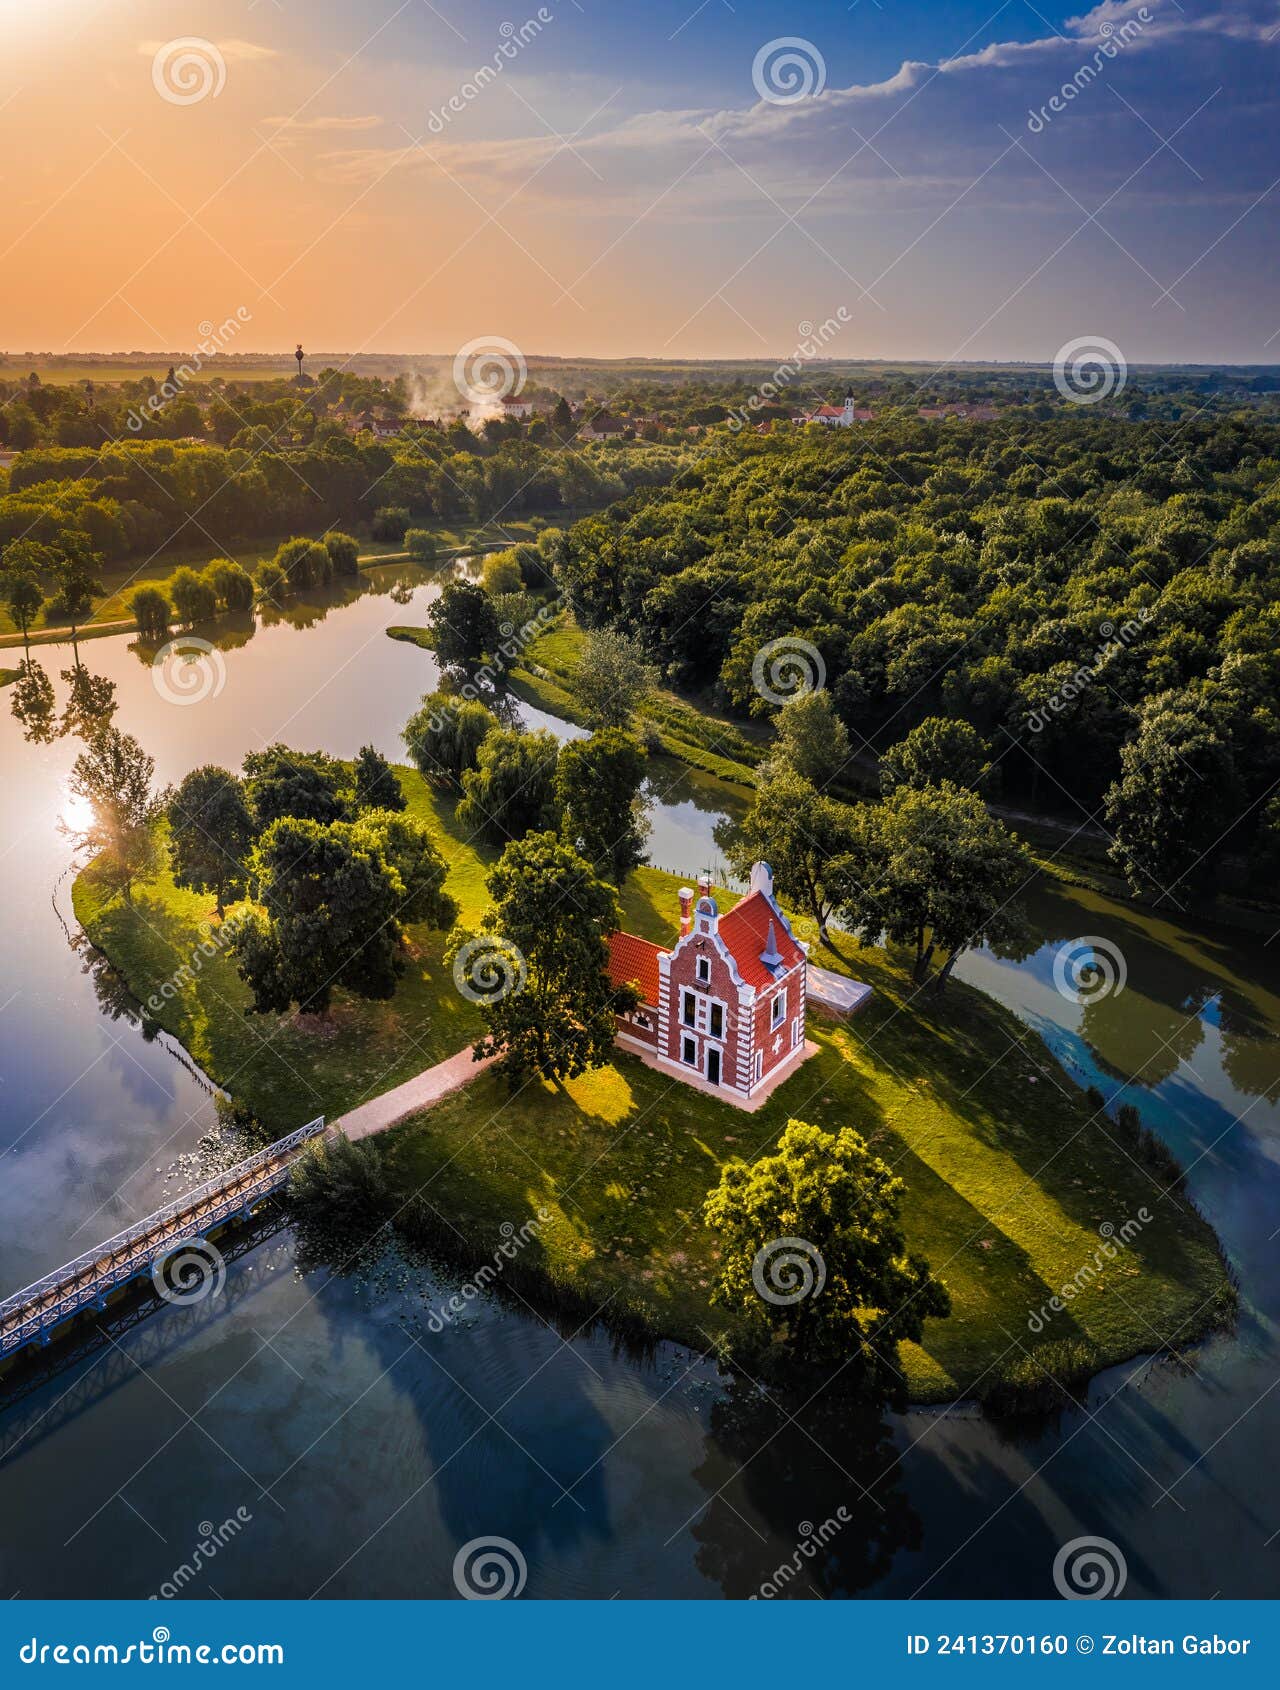 deg, hungary - aerial panoramic view of the beautiful holland house hollandi haz on a small island at the village of deg